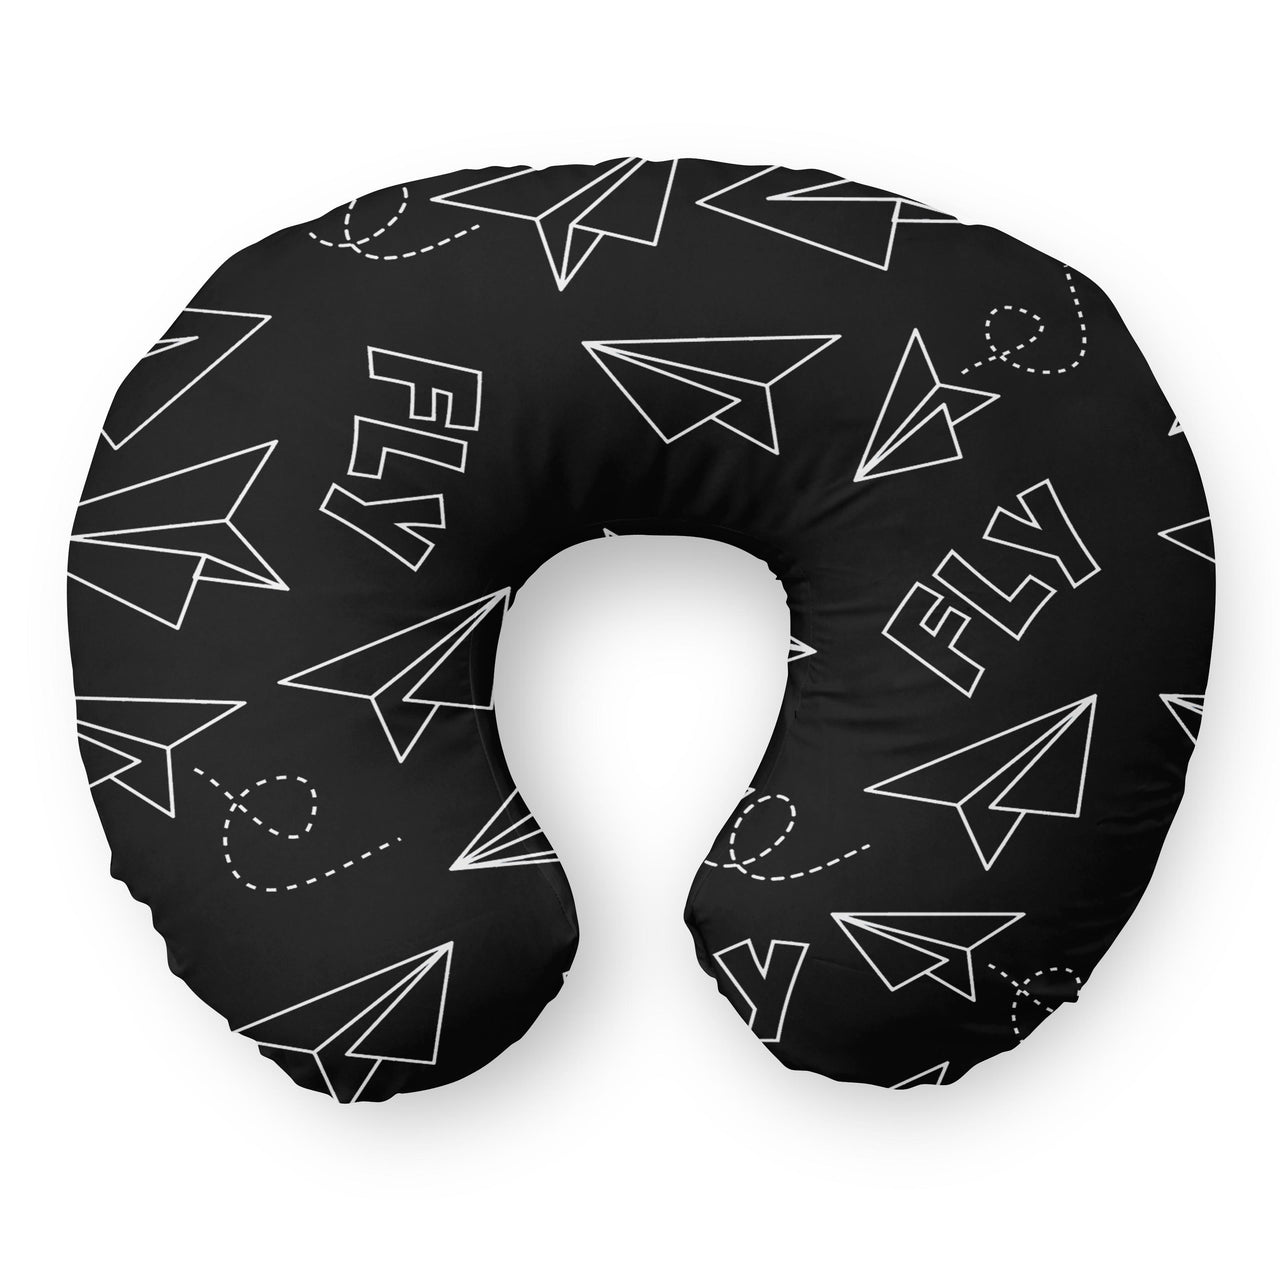 Paper Airplane & Fly (Black) Travel & Boppy Pillows